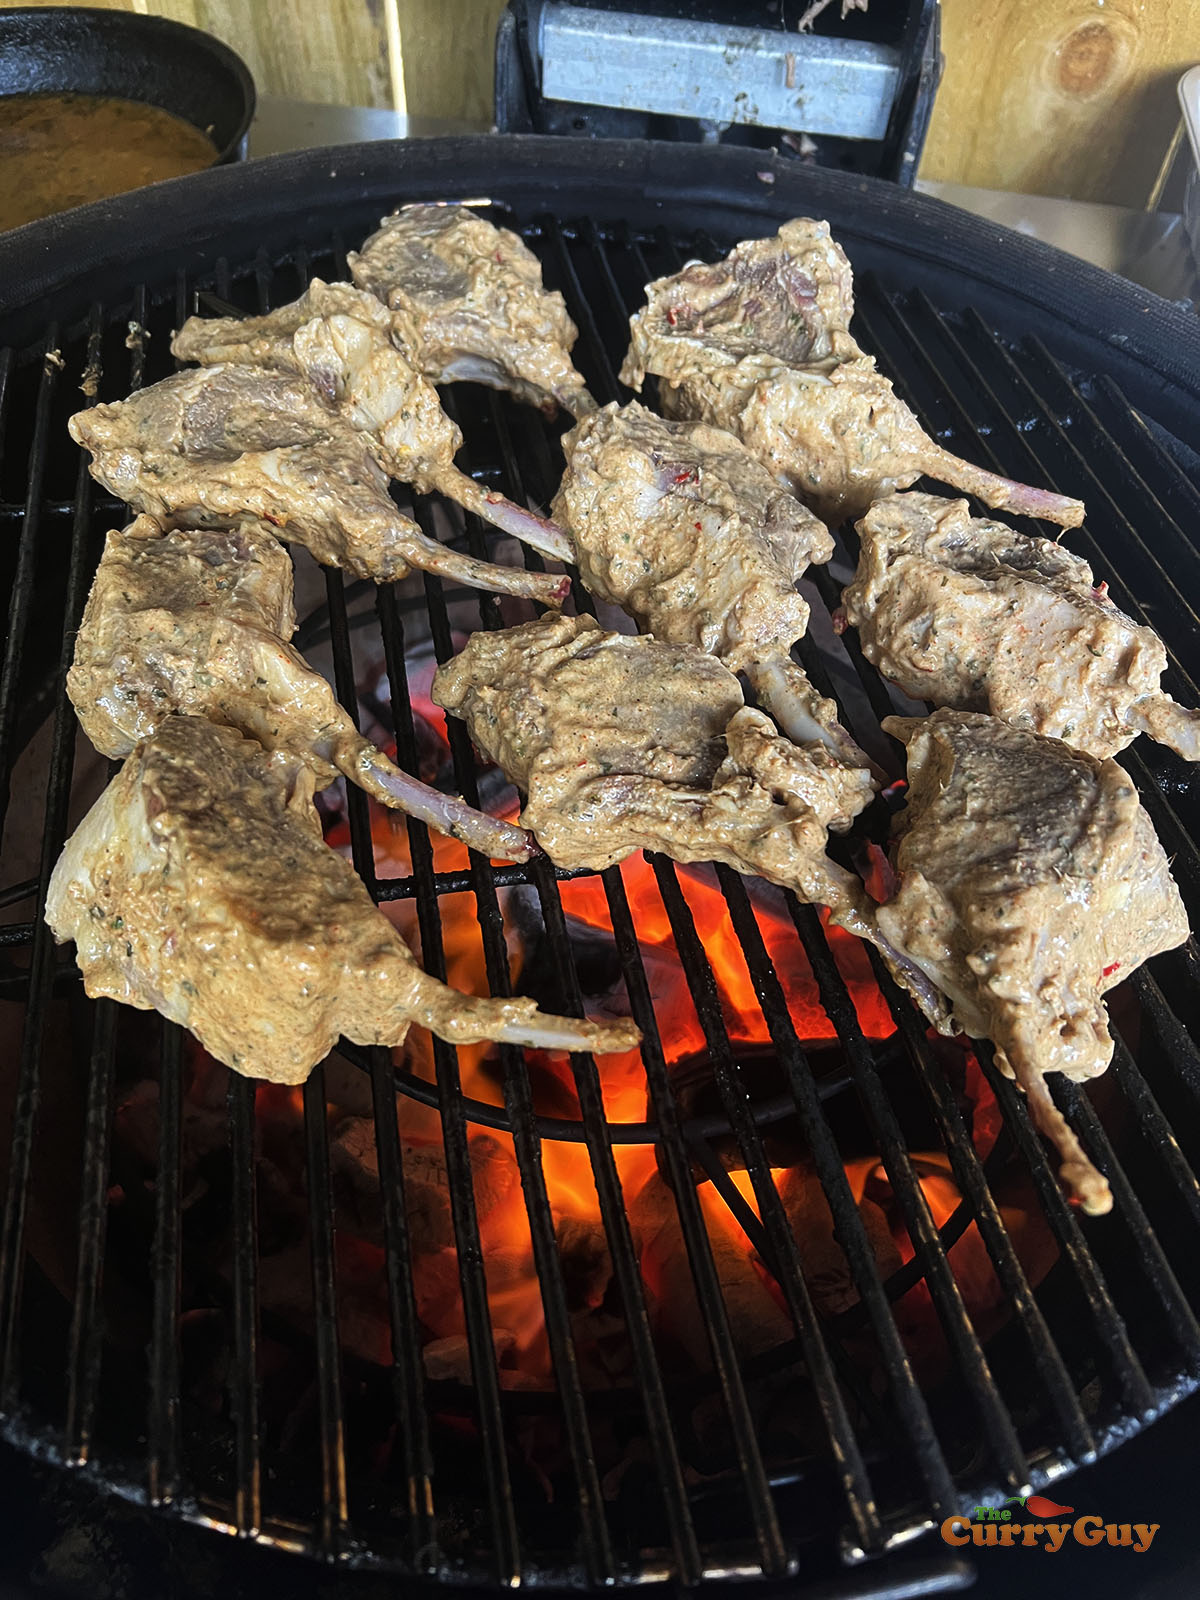 Cooking the tandoori lamb chops on the barbecue.